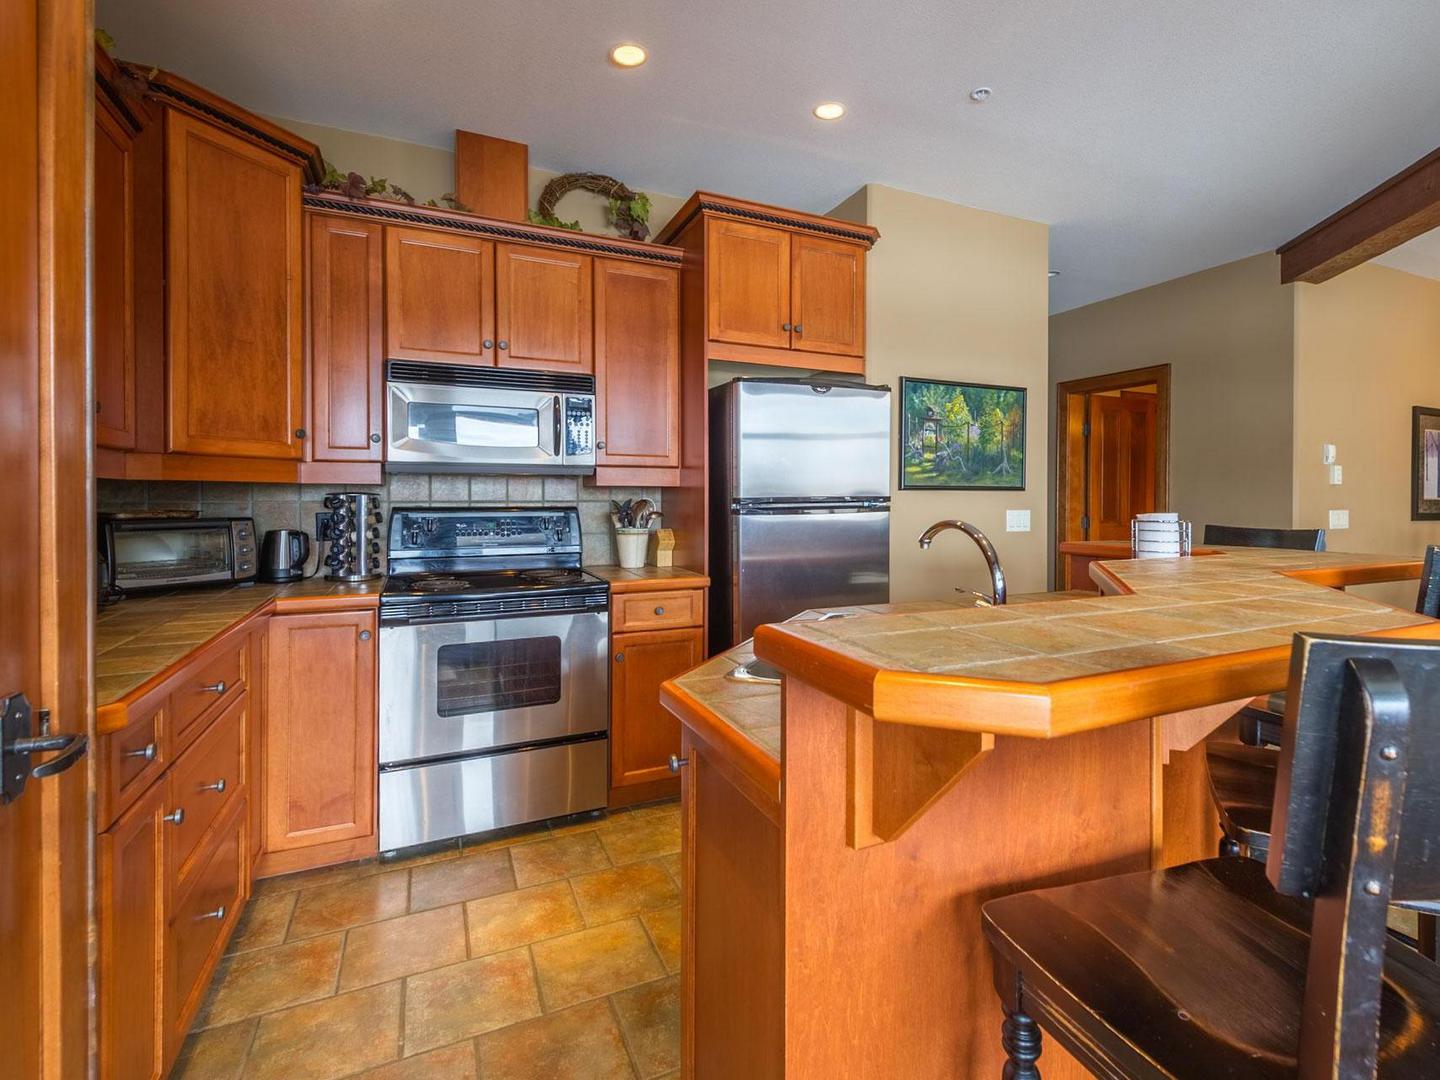 Spyglass 5C's gourmet kitchen with traditional chalet touches and stainless steel appliances, managed by Luxury Mountain Vacation Rentals at Big White Ski Resort